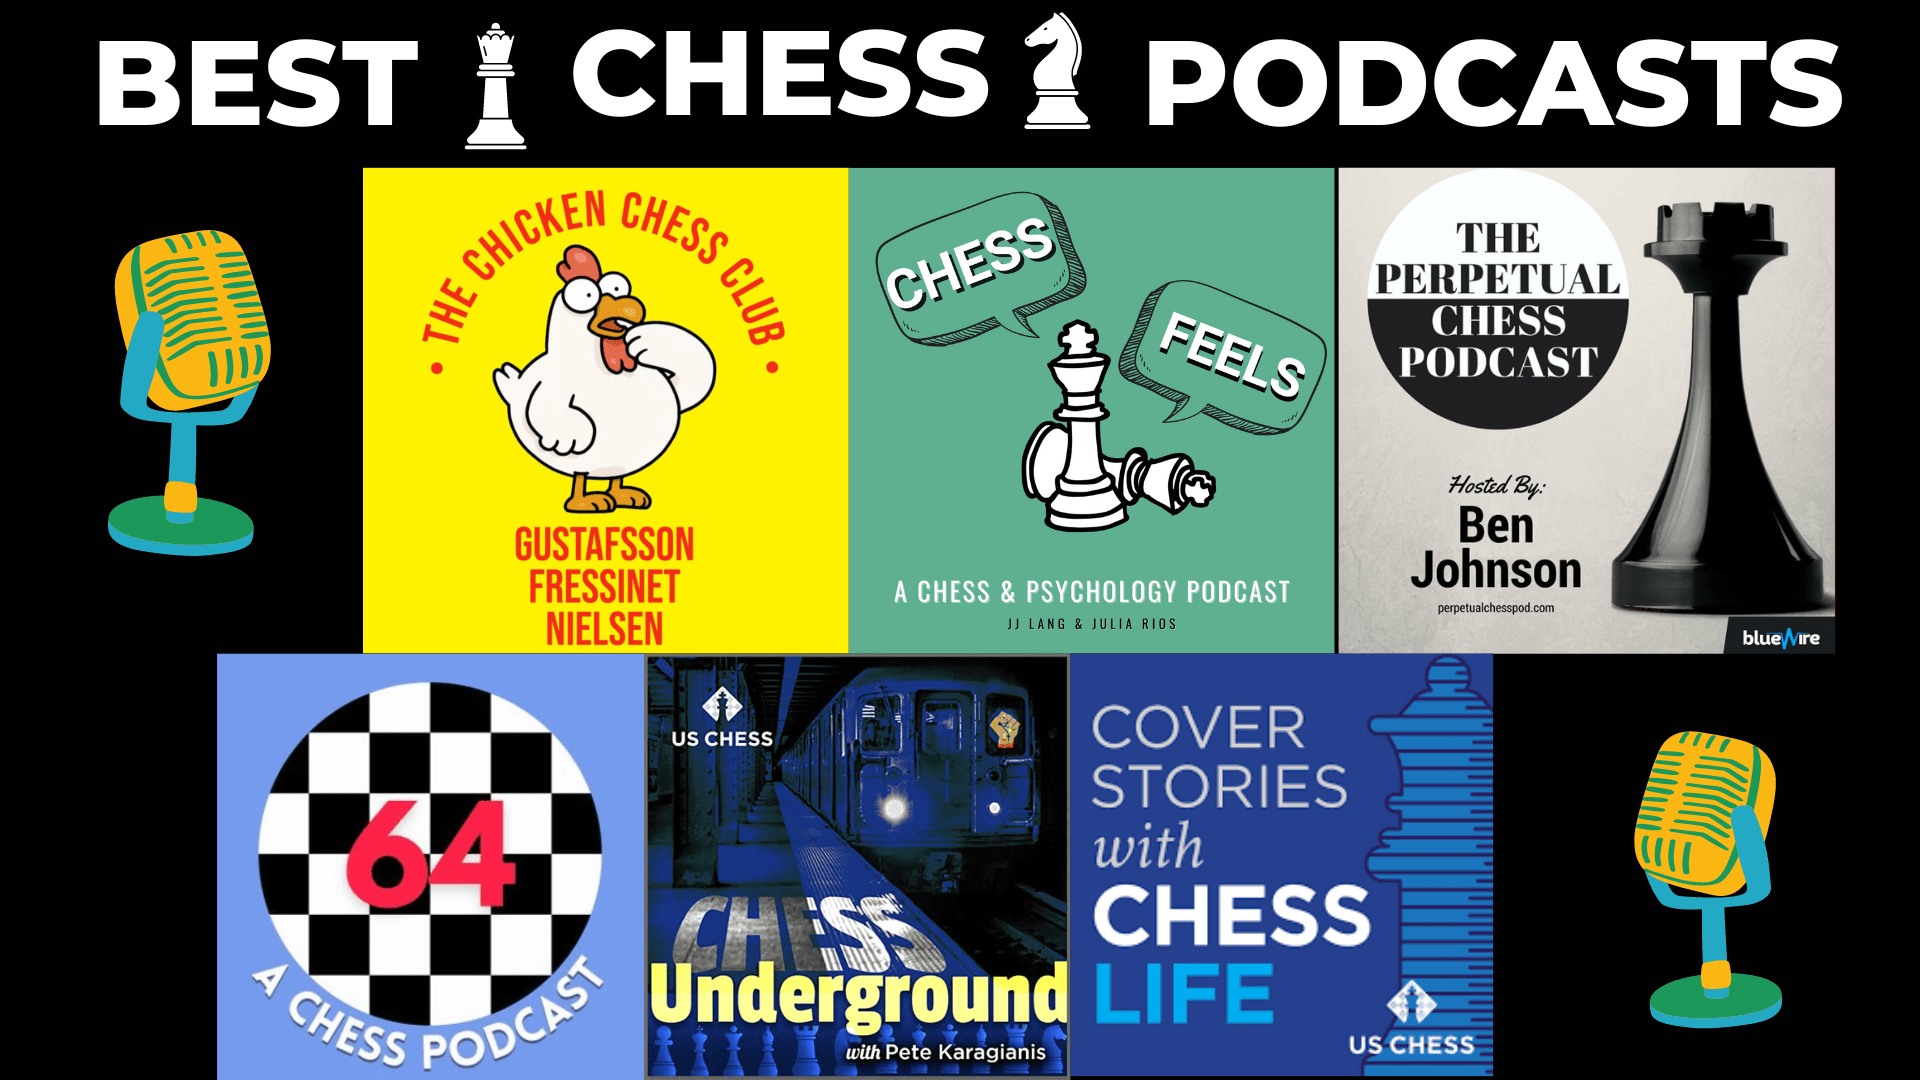 Best Chess Podcasts: The Ultimate Guide To Chess Podcasts in 2022